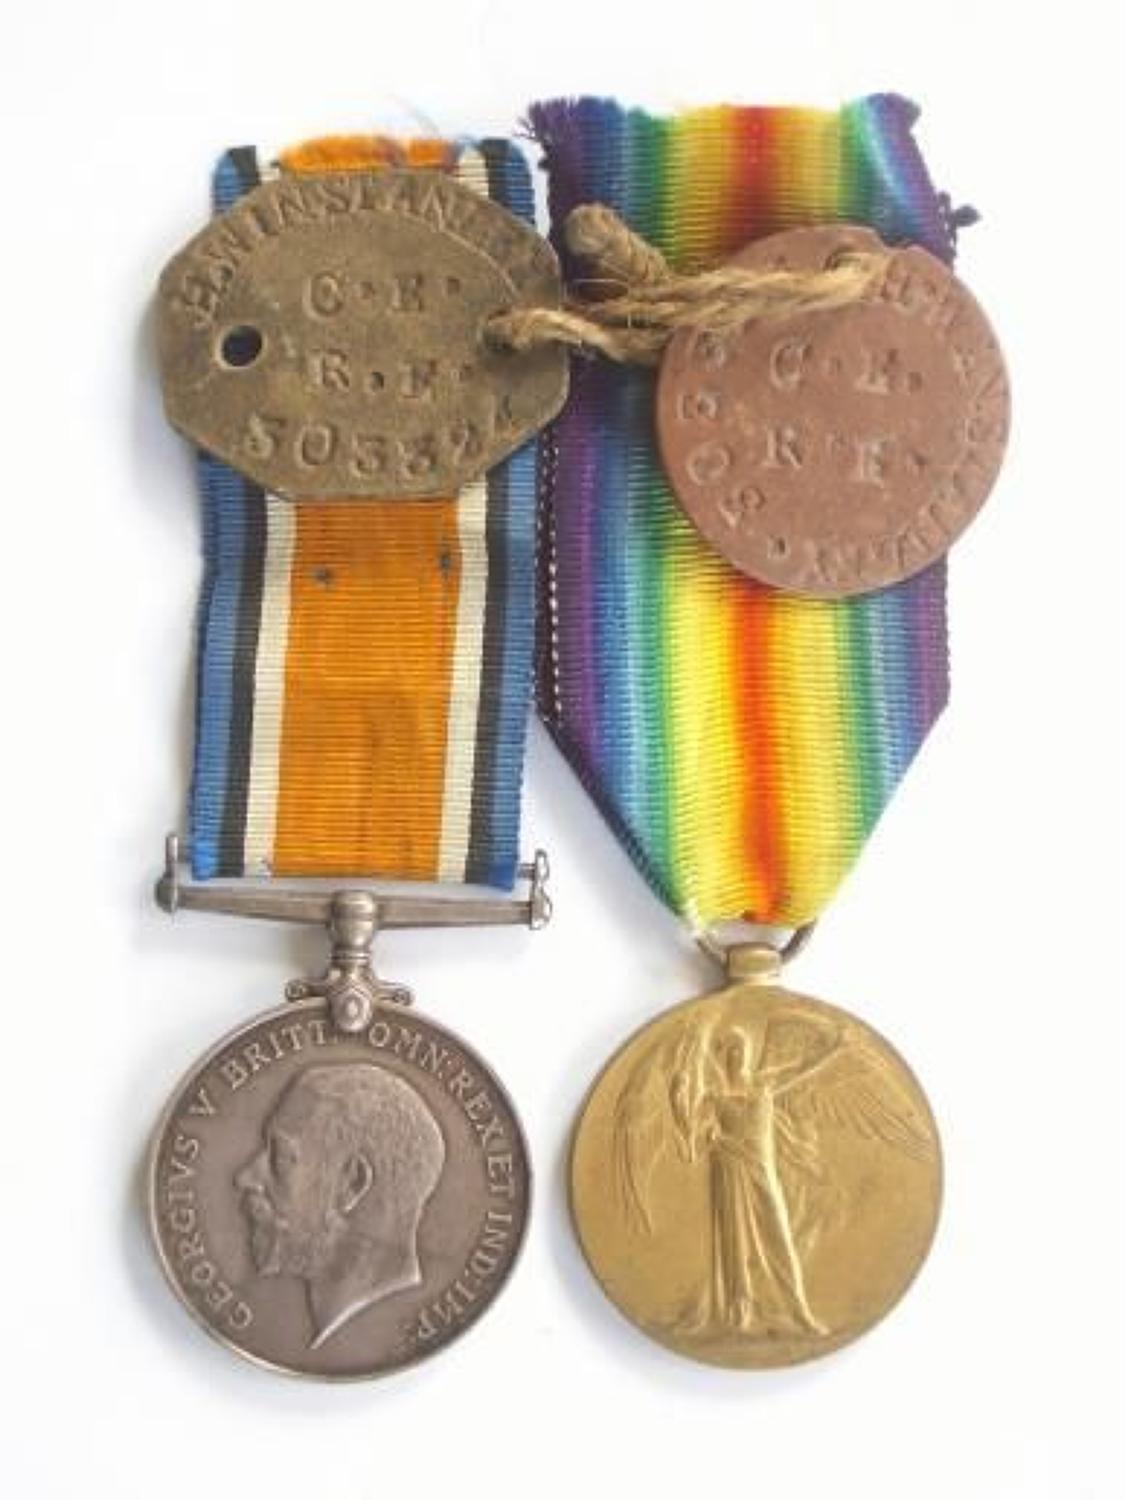 WW1 Royal Engineers Pair of Medals & Dog Tags.